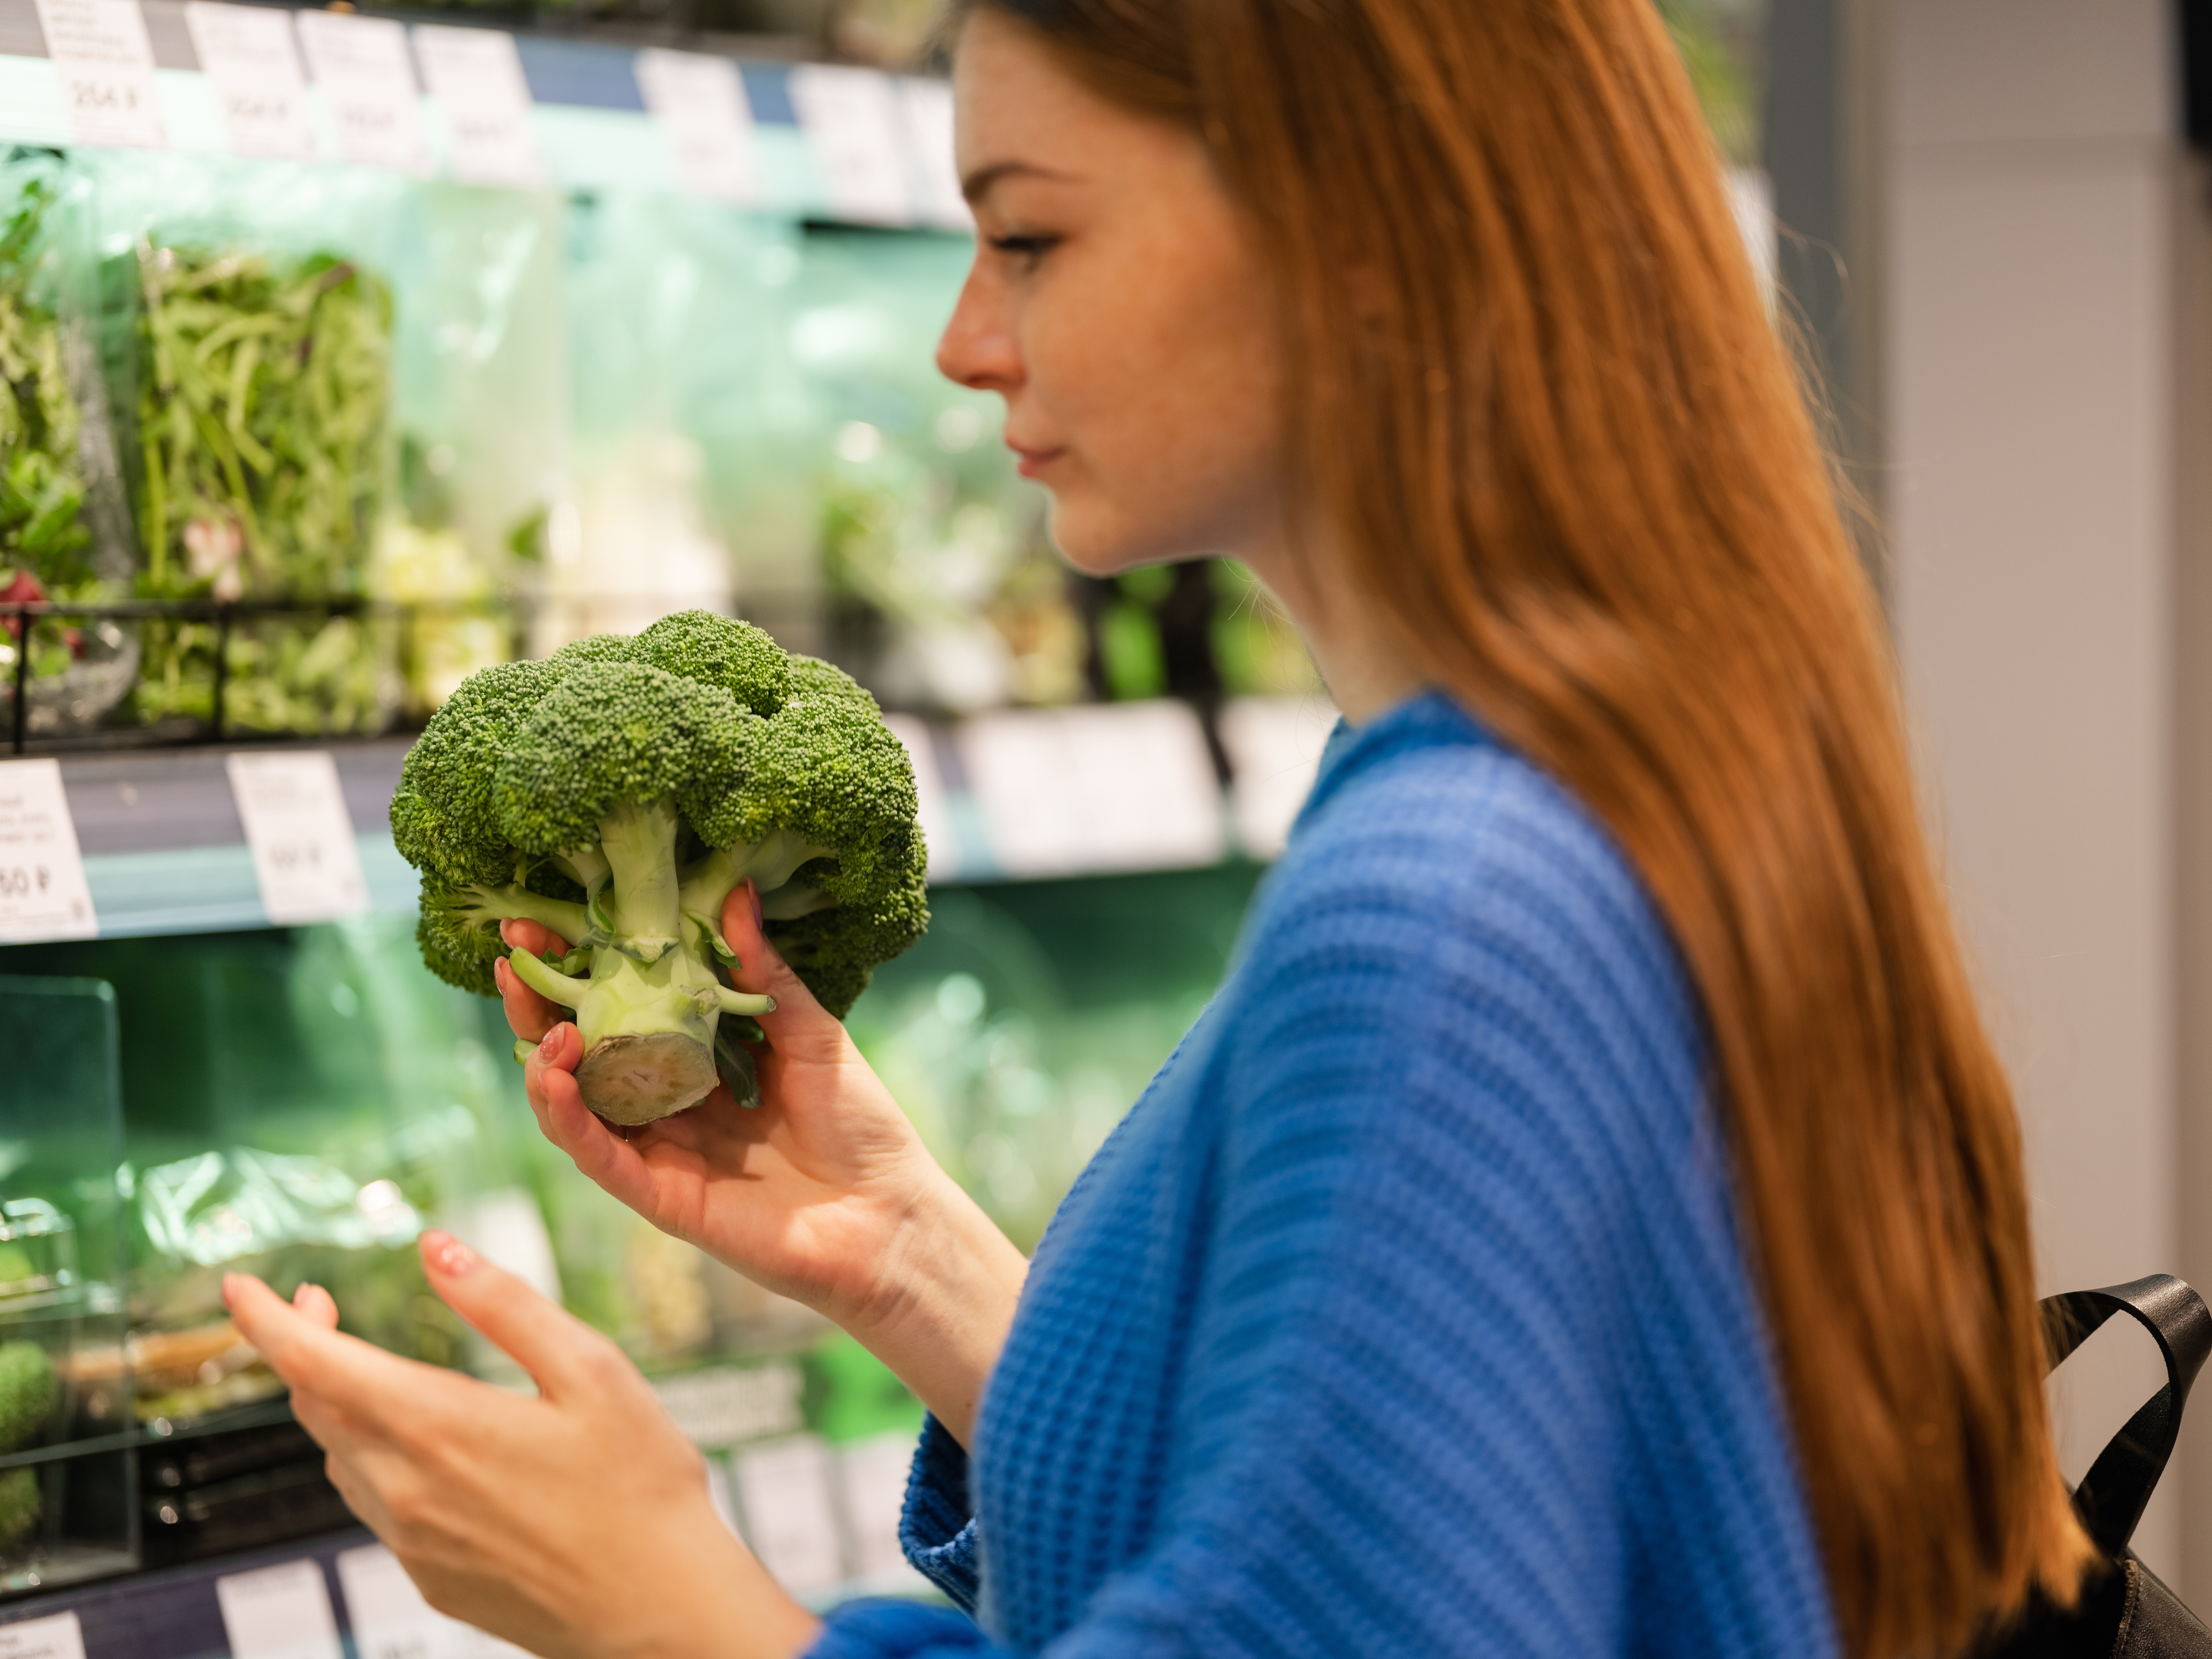 woman shopping for produce holding a broccoli